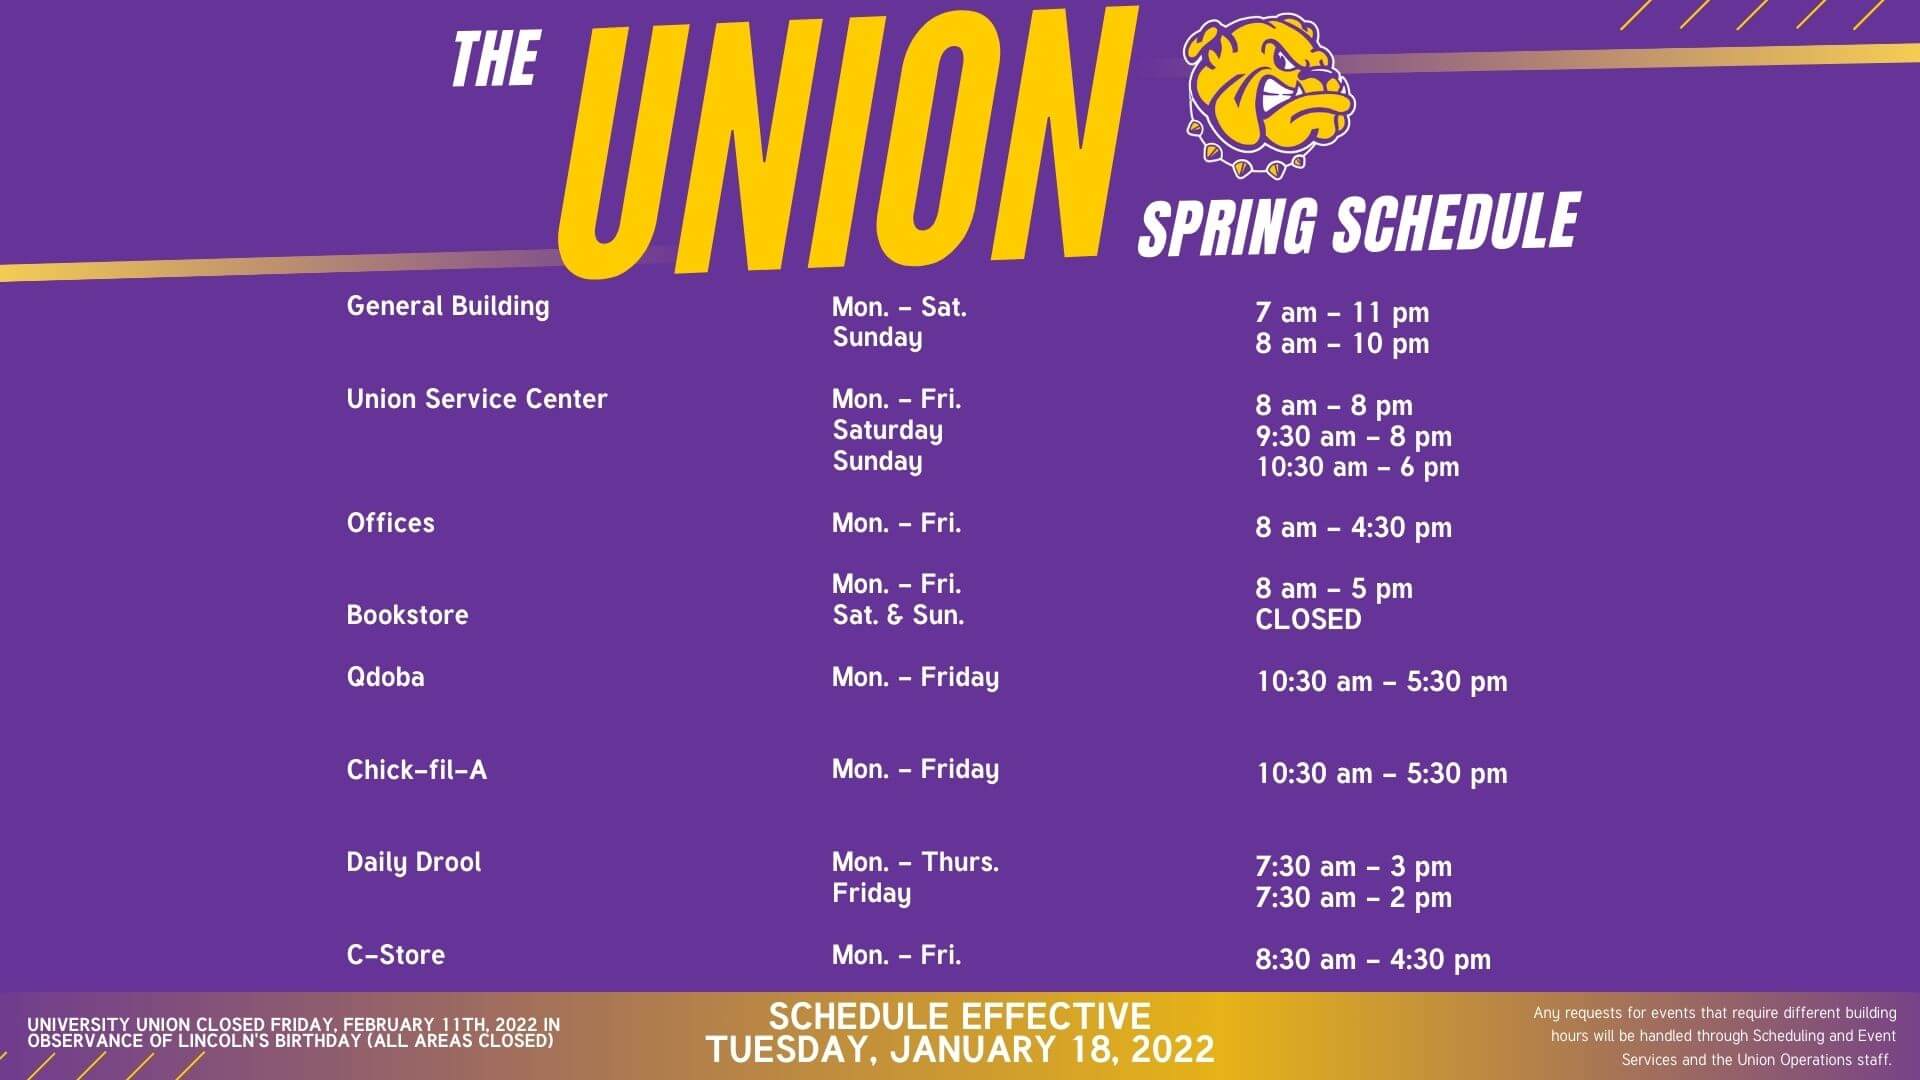 University Union 2022 Spring Hours - click link below to access a text only version.